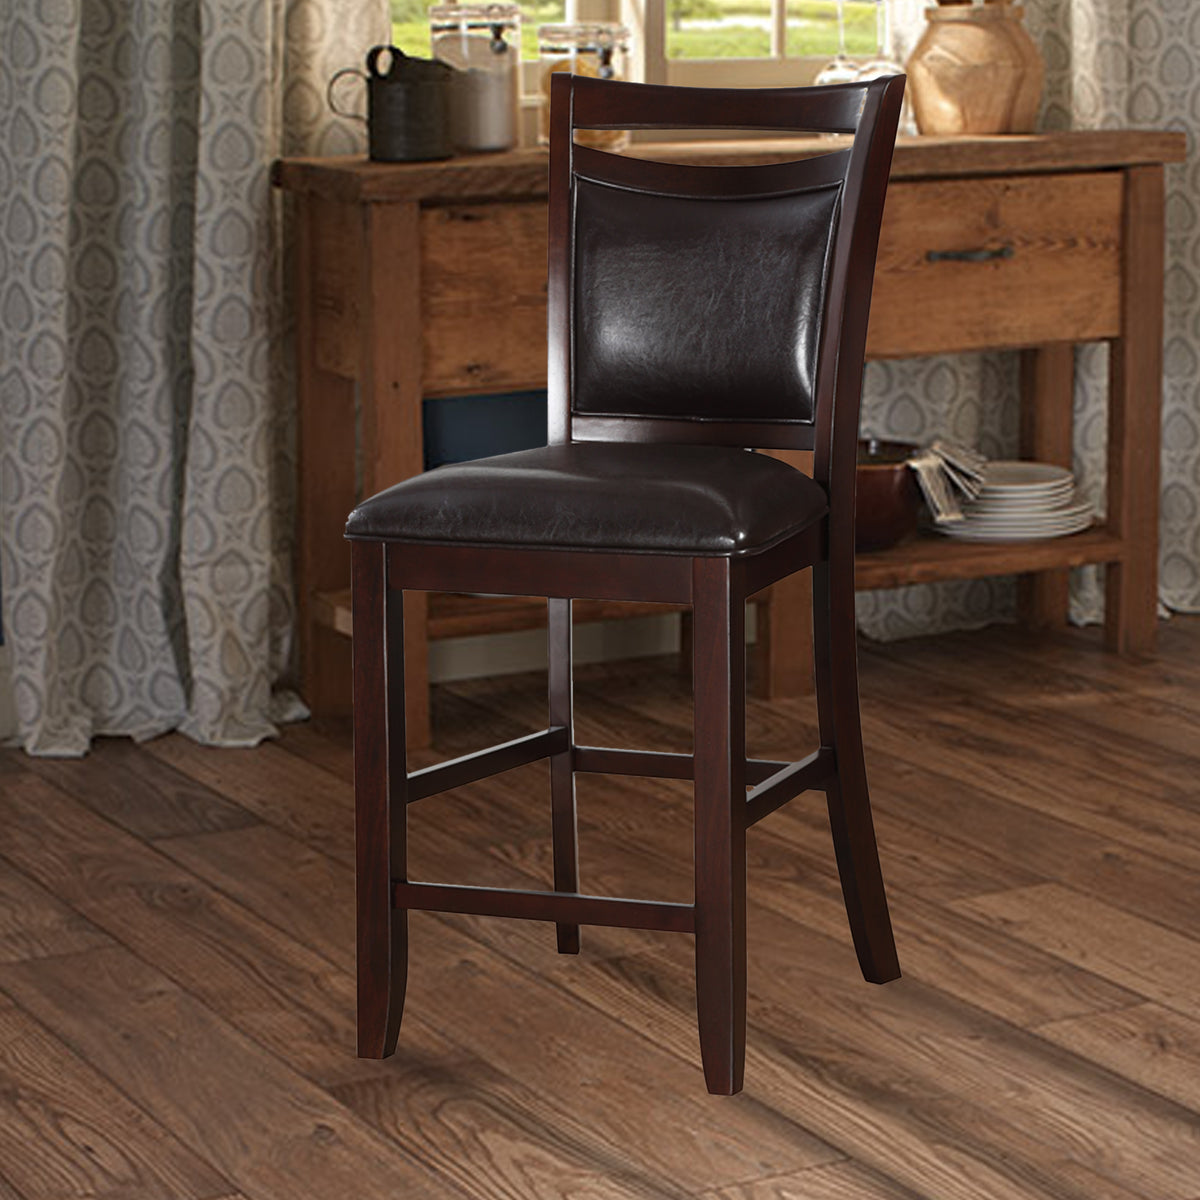 Classic Wooden Armless High Chair, Brown & Black, Set of 2 - BM166597